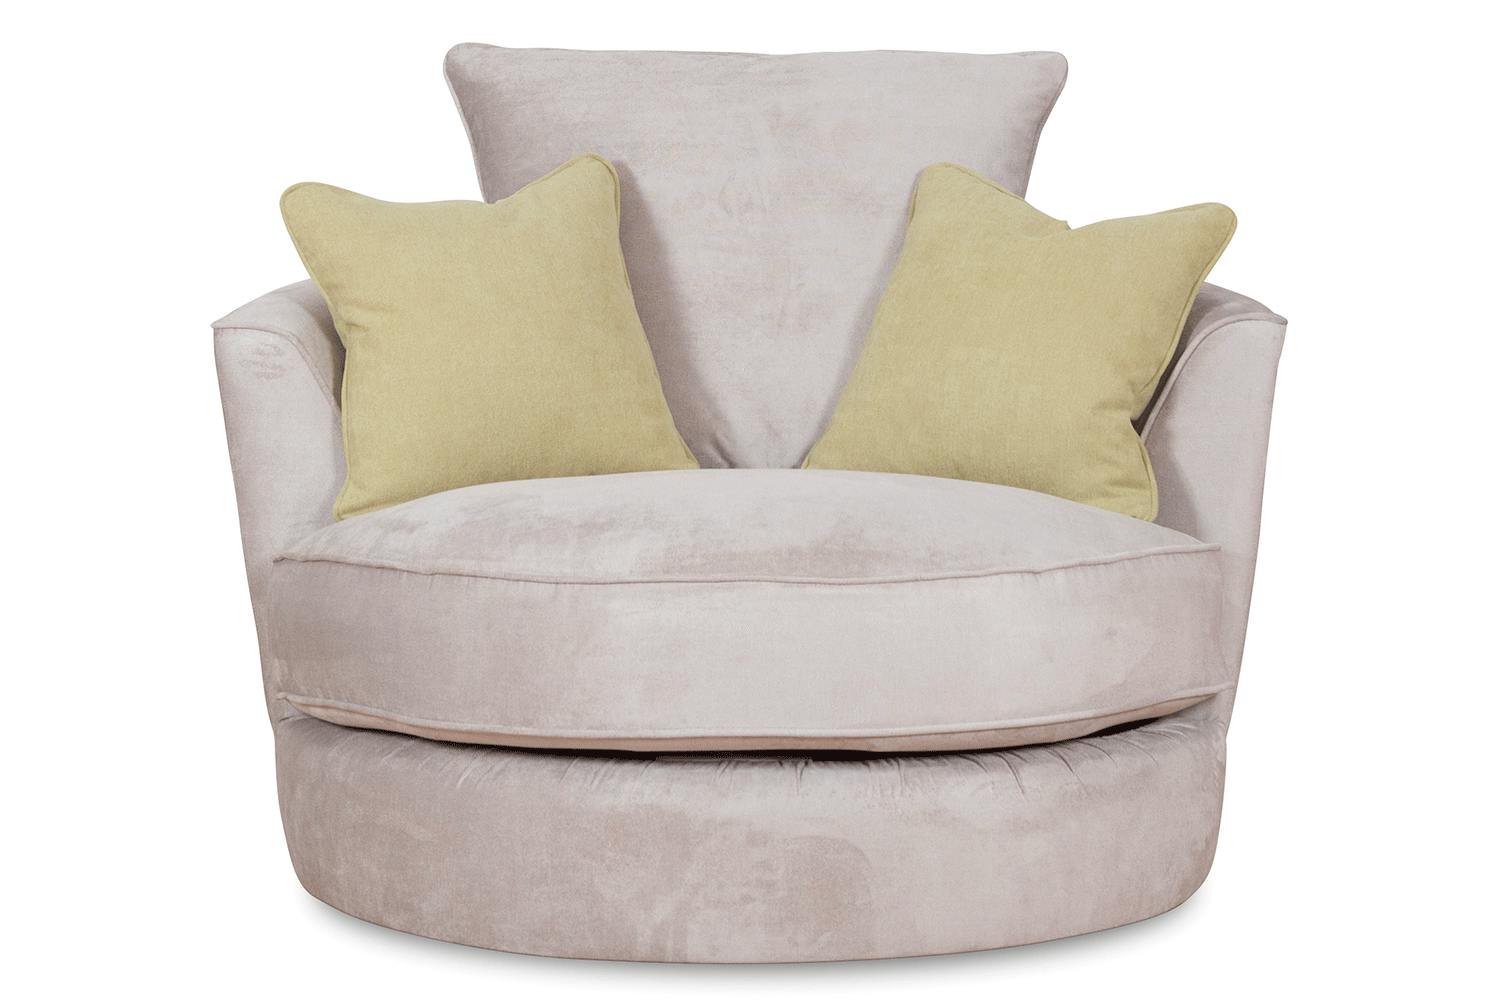 Round Swivel Couch Chair : And the different styles mean they fit in